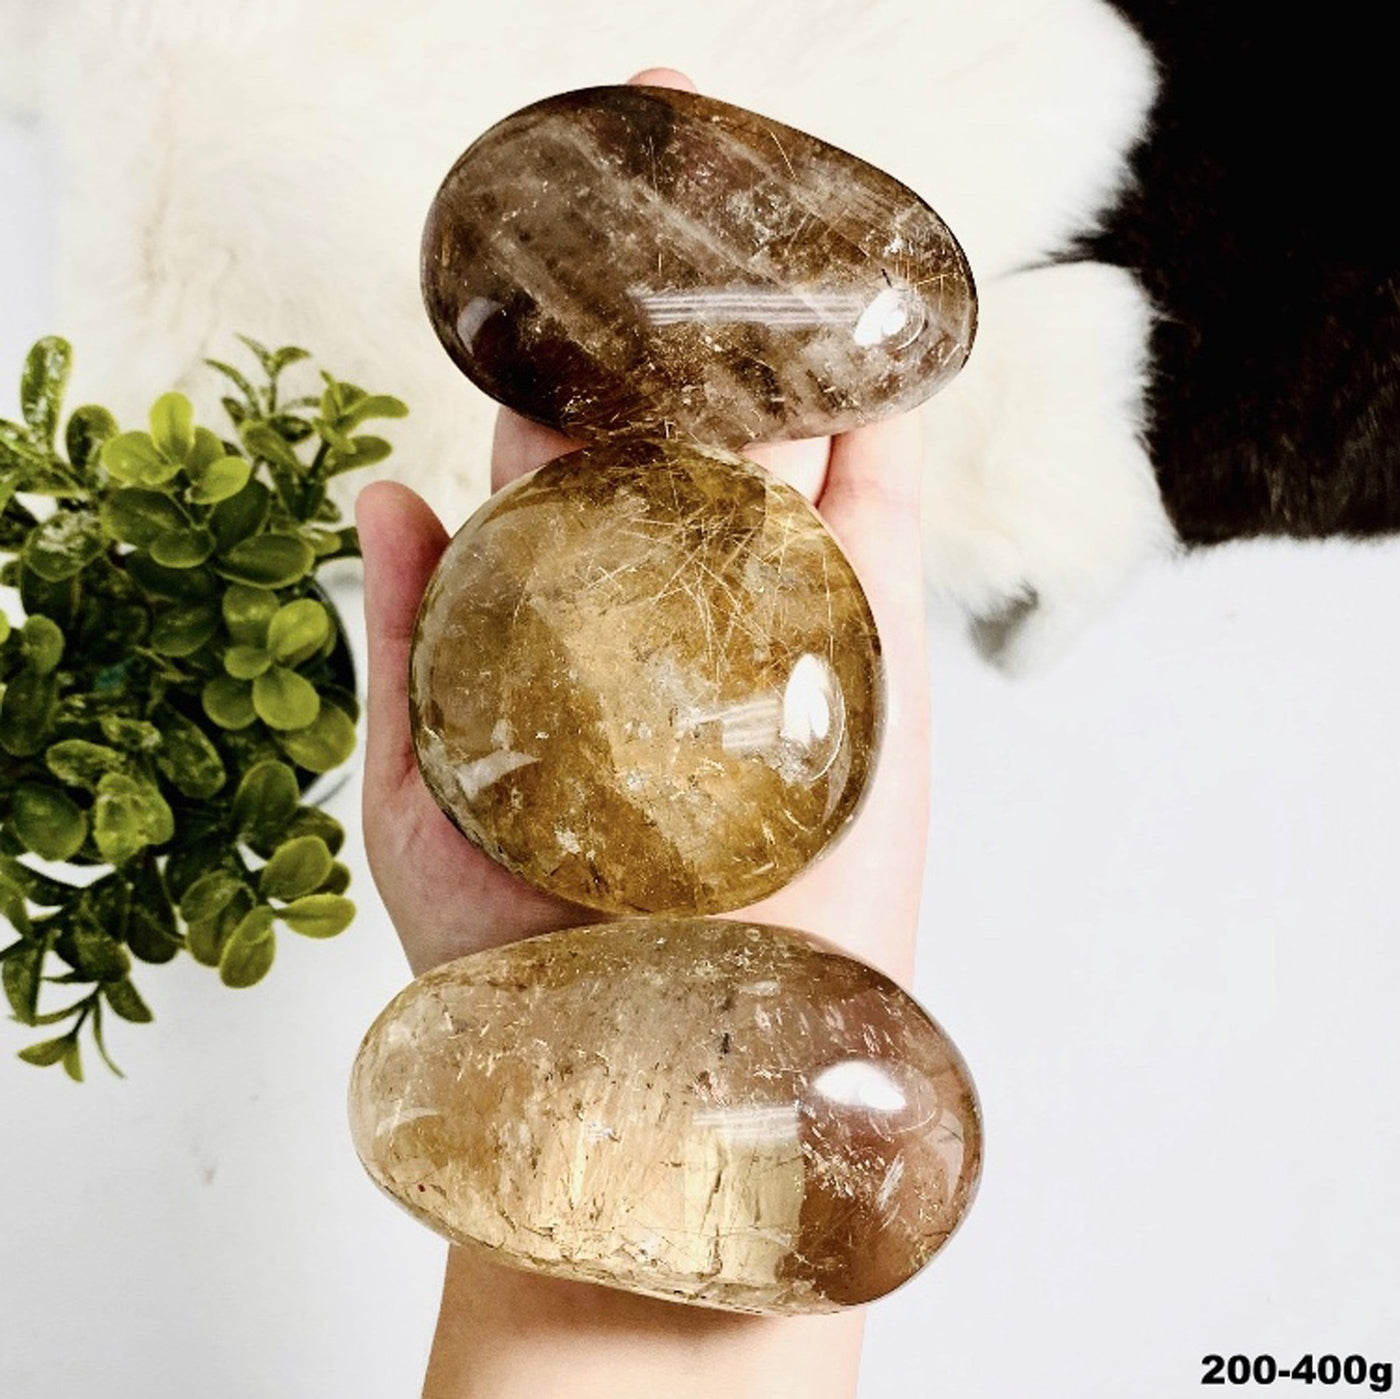 3 pieces of Rutilated Quartz Polished Lens' in a hand for the size 200-400g